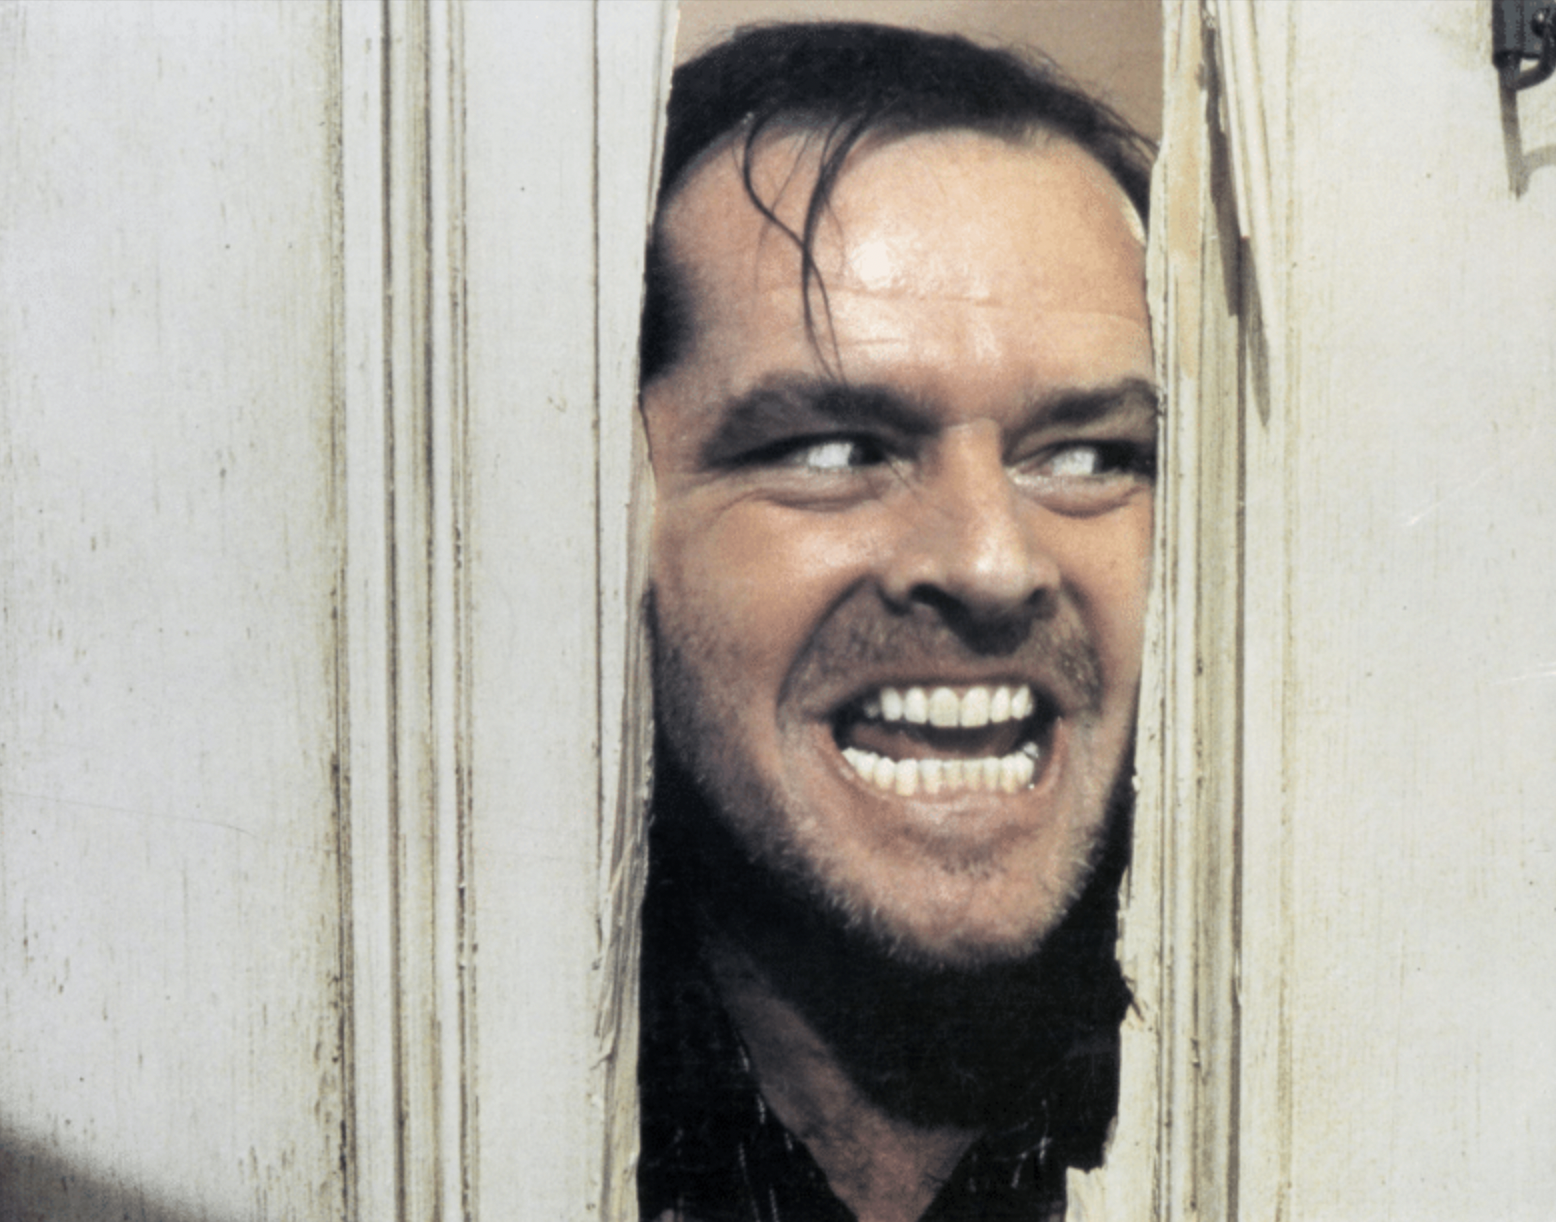 <p>"The Shining," directed by Stanley Kubrick in 1980, is a psychological horror film that has become iconic in the genre. Adapted from Stephen King's novel, the movie plunges viewers into the eerie world of the Overlook Hotel, where Jack Torrance, played by Jack Nicholson, descends into madness. Known for its haunting visuals and unsettling atmosphere, "The Shining" remains a masterclass in suspense and a quintessential film of the 1980s.</p>